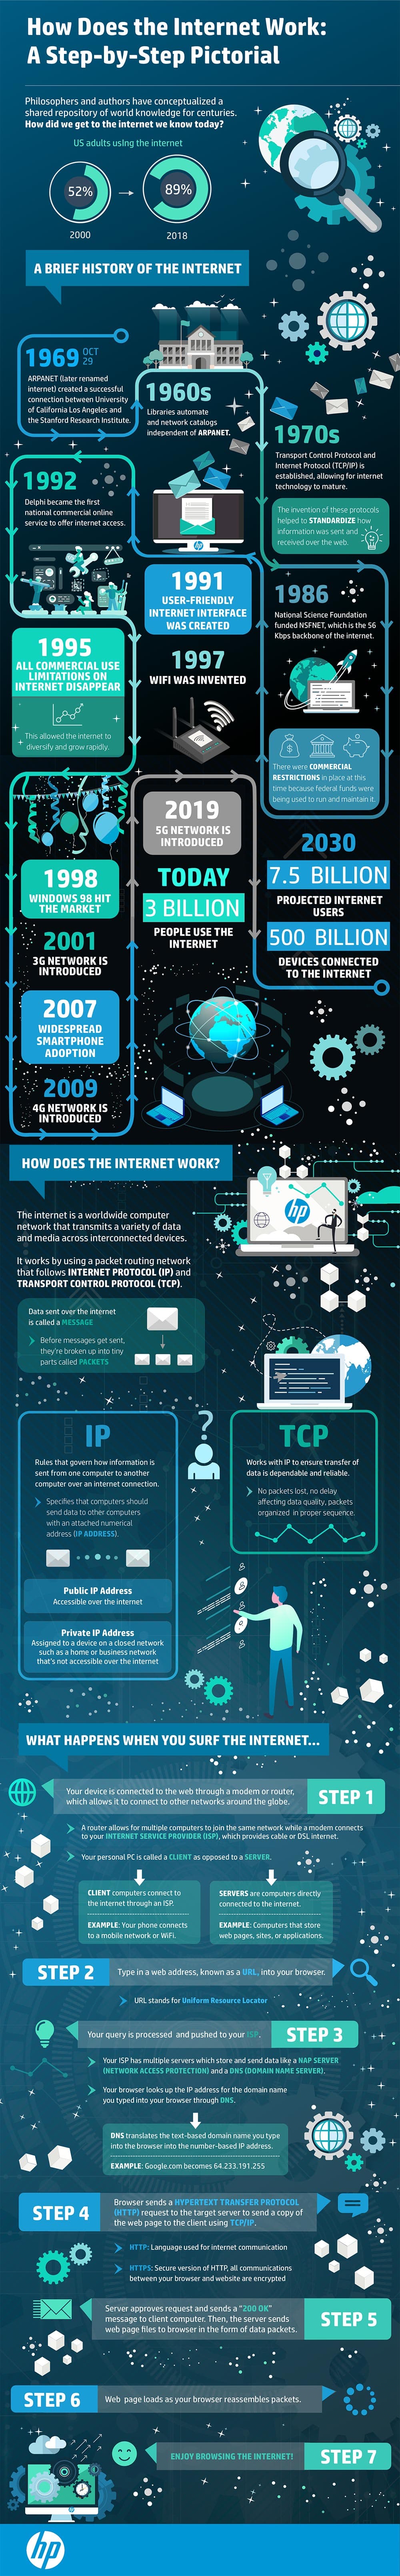 How Does the Internet Work Infographic